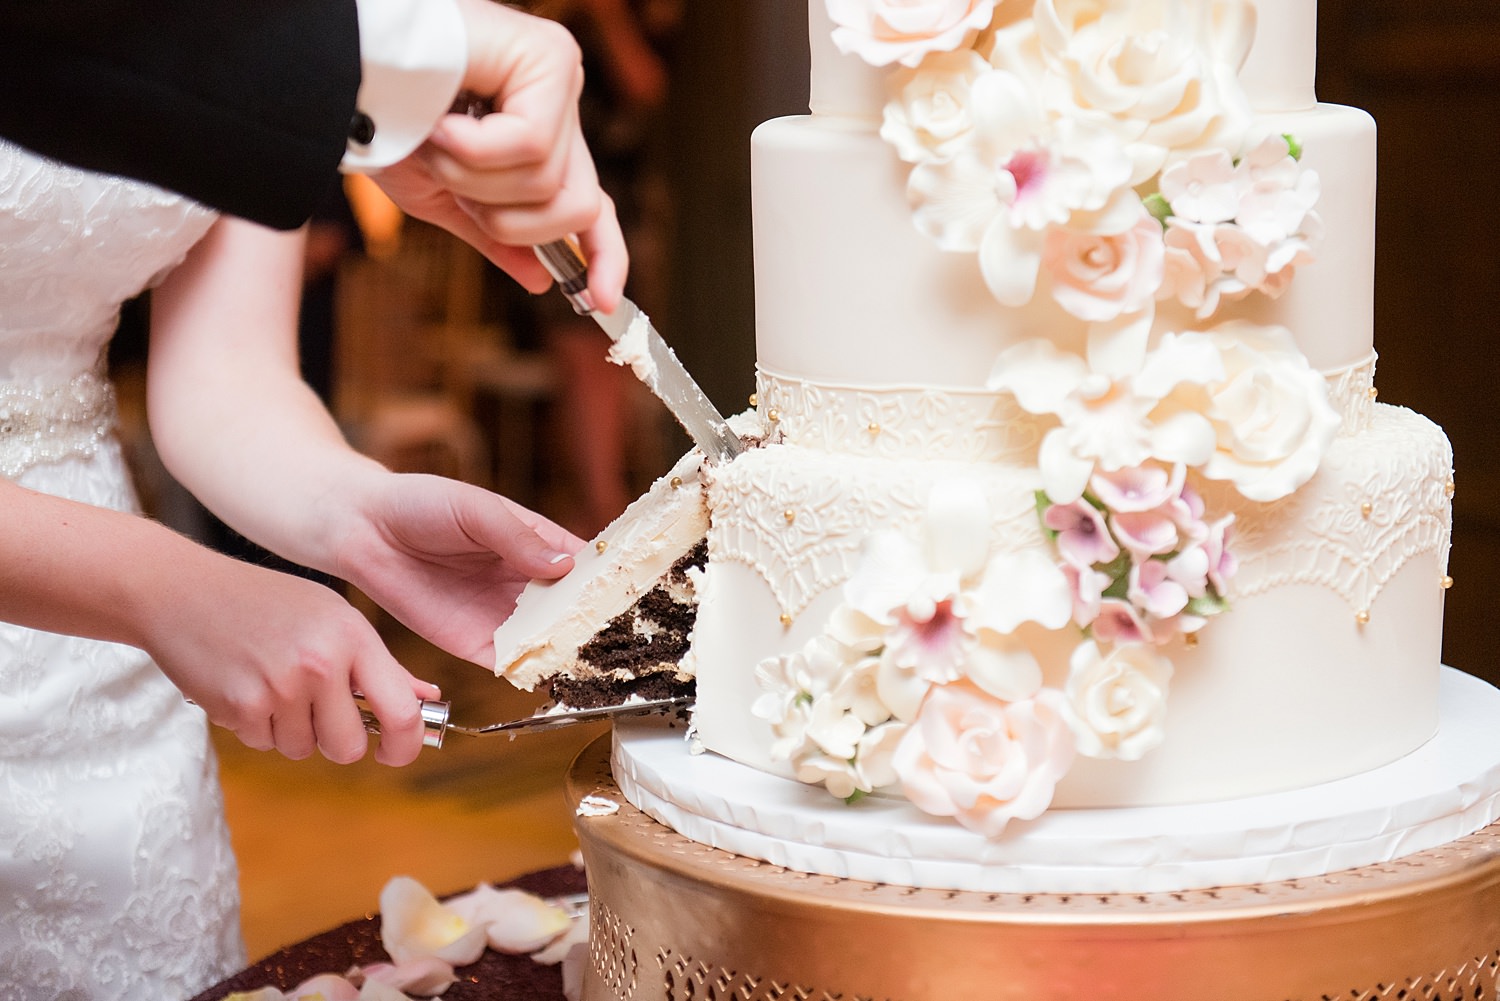 wedding cake cutting • Recommended Vendors